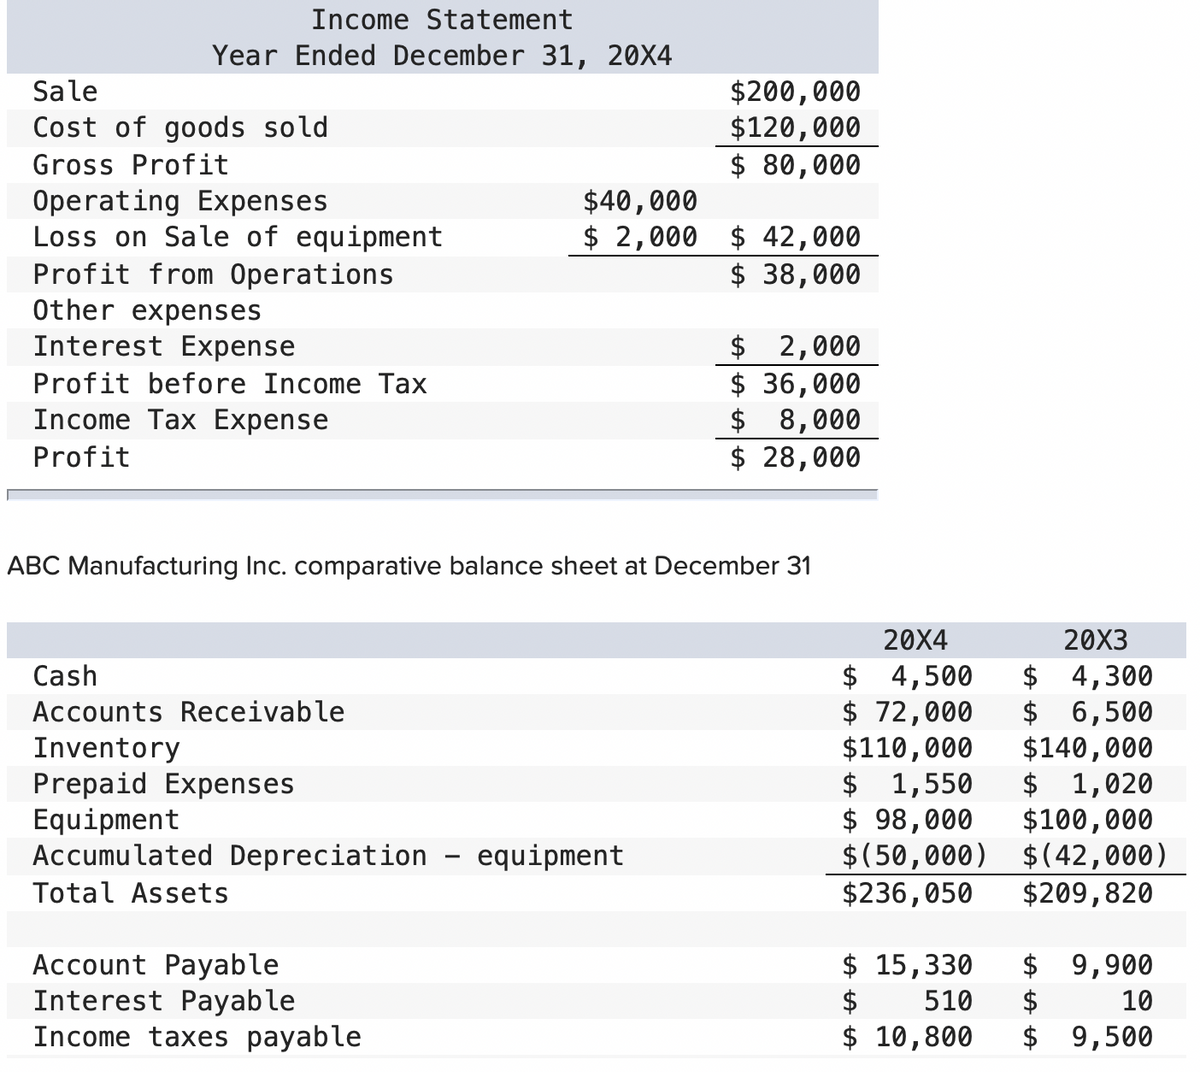 Income Statement
Year Ended December 31, 20X4
Sale
Cost of goods sold
Gross Profit
Operating Expenses
Loss on Sale of equipment
Profit from Operations
Other expenses
Interest Expense
Profit before Income Tax
Income Tax Expense
Profit
$40,000
$2,000
Cash
Accounts Receivable
Inventory
Prepaid Expenses
Equipment
Accumulated Depreciation - equipment
Total Assets
Account Payable
Interest Payable
Income taxes payable
$200,000
$120,000
$ 80,000
$ 42,000
$ 38,000
ABC Manufacturing Inc. comparative balance sheet at December 31
$ 2,000
$ 36,000
$ 8,000
$ 28,000
20X4
$
4,500
$ 72,000
$110,000
20X3
$ 4,300
$ 6,500
$140,000
$ 1,550
$ 1,020
$100,000
$ 98,000
$(50,000) $(42,000)
$236,050
$209,820
$ 15,330
$
510
$ 10,800
$ 9,900
$
10
$ 9,500